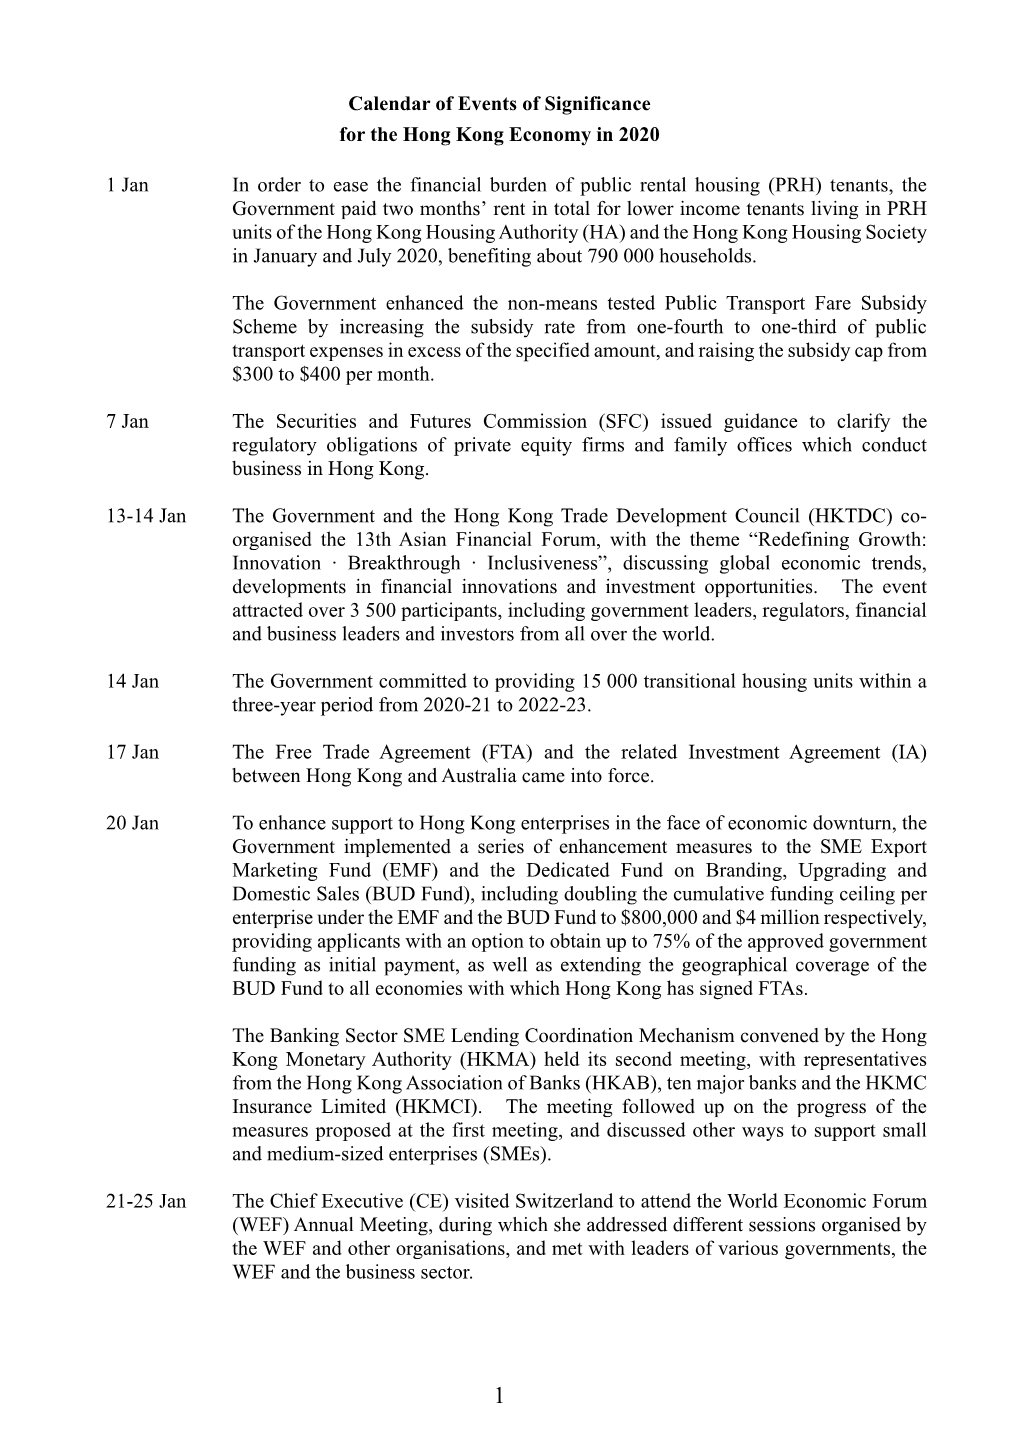 Calendar of Events of Significance for the Hong Kong Economy in 2020 1 Jan in Order to Ease the Financial Burden of Public Renta